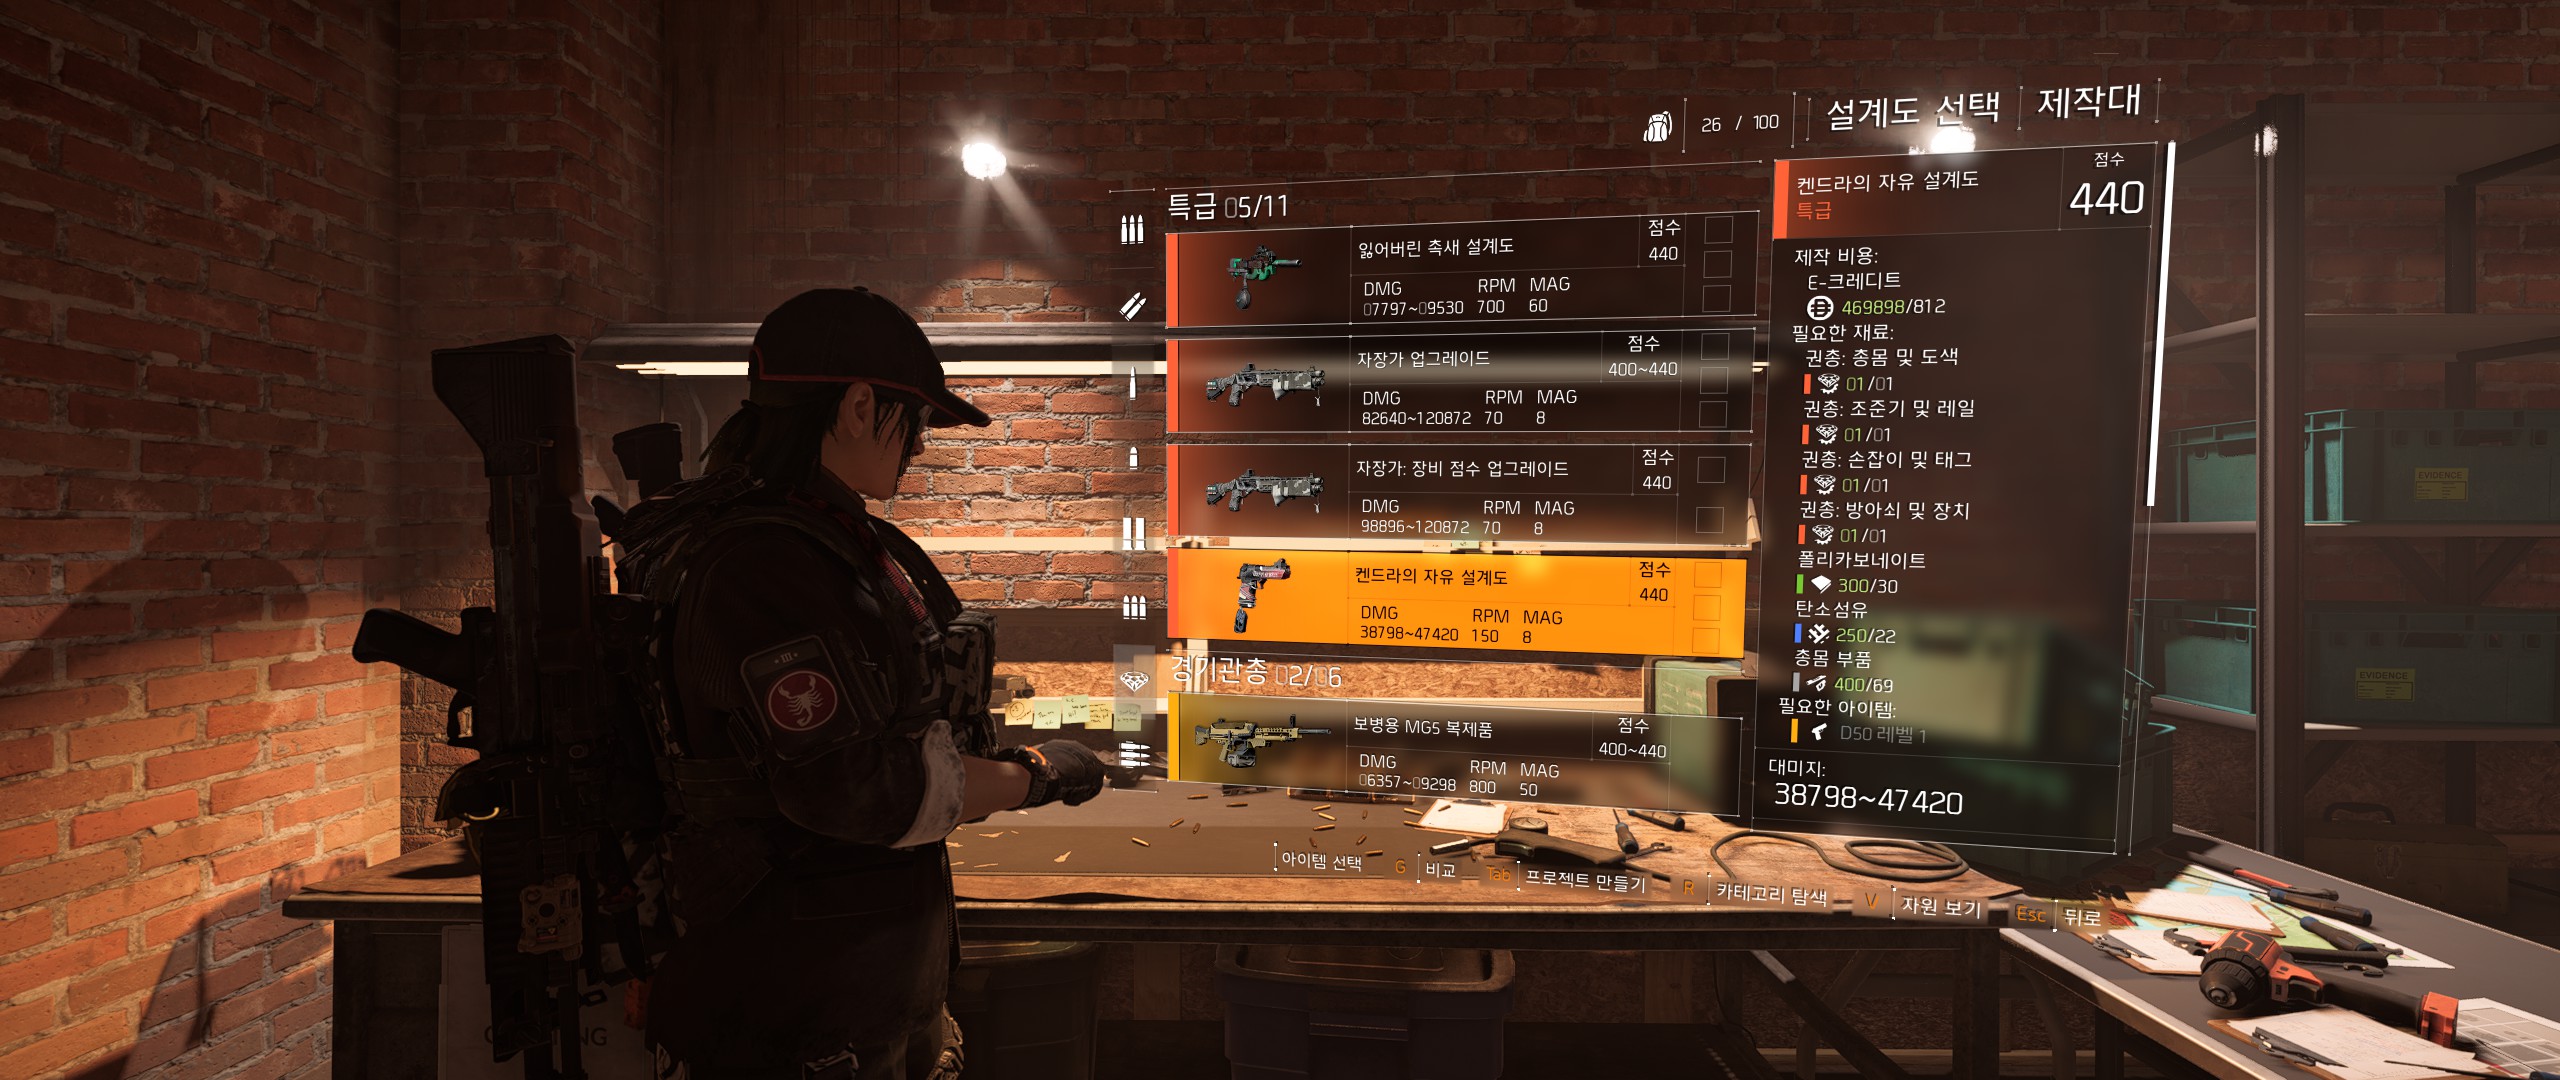 Tom Clancy's The Division® 22019-4-1-18-47-38.jpg